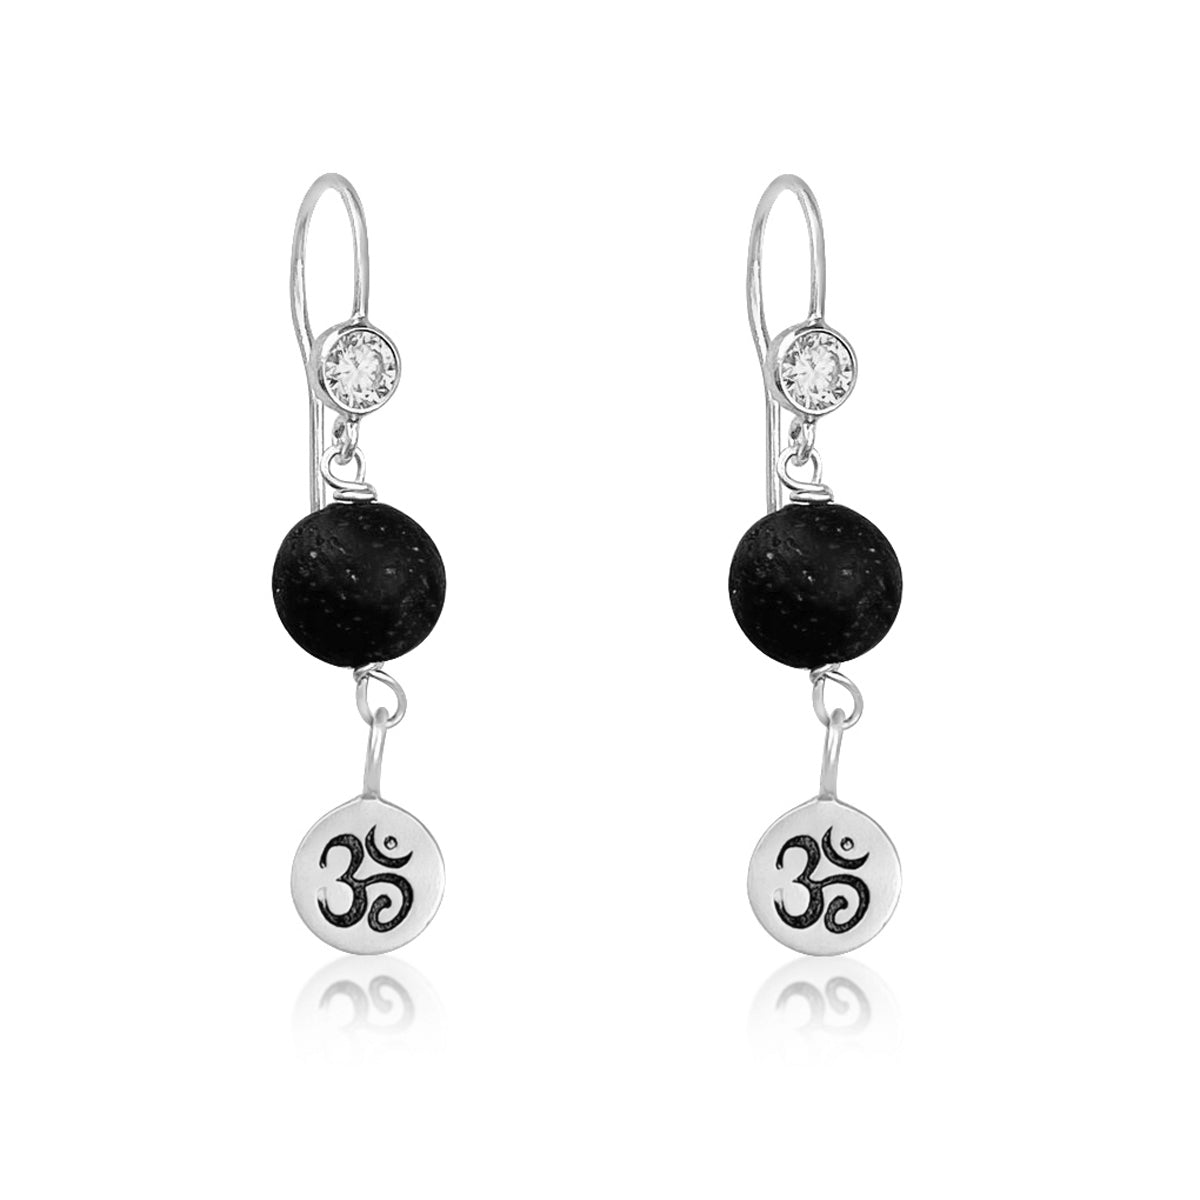 Yoga Inspired Earrings with Ohm and Lava Stone to Hear the Sound of the Universe